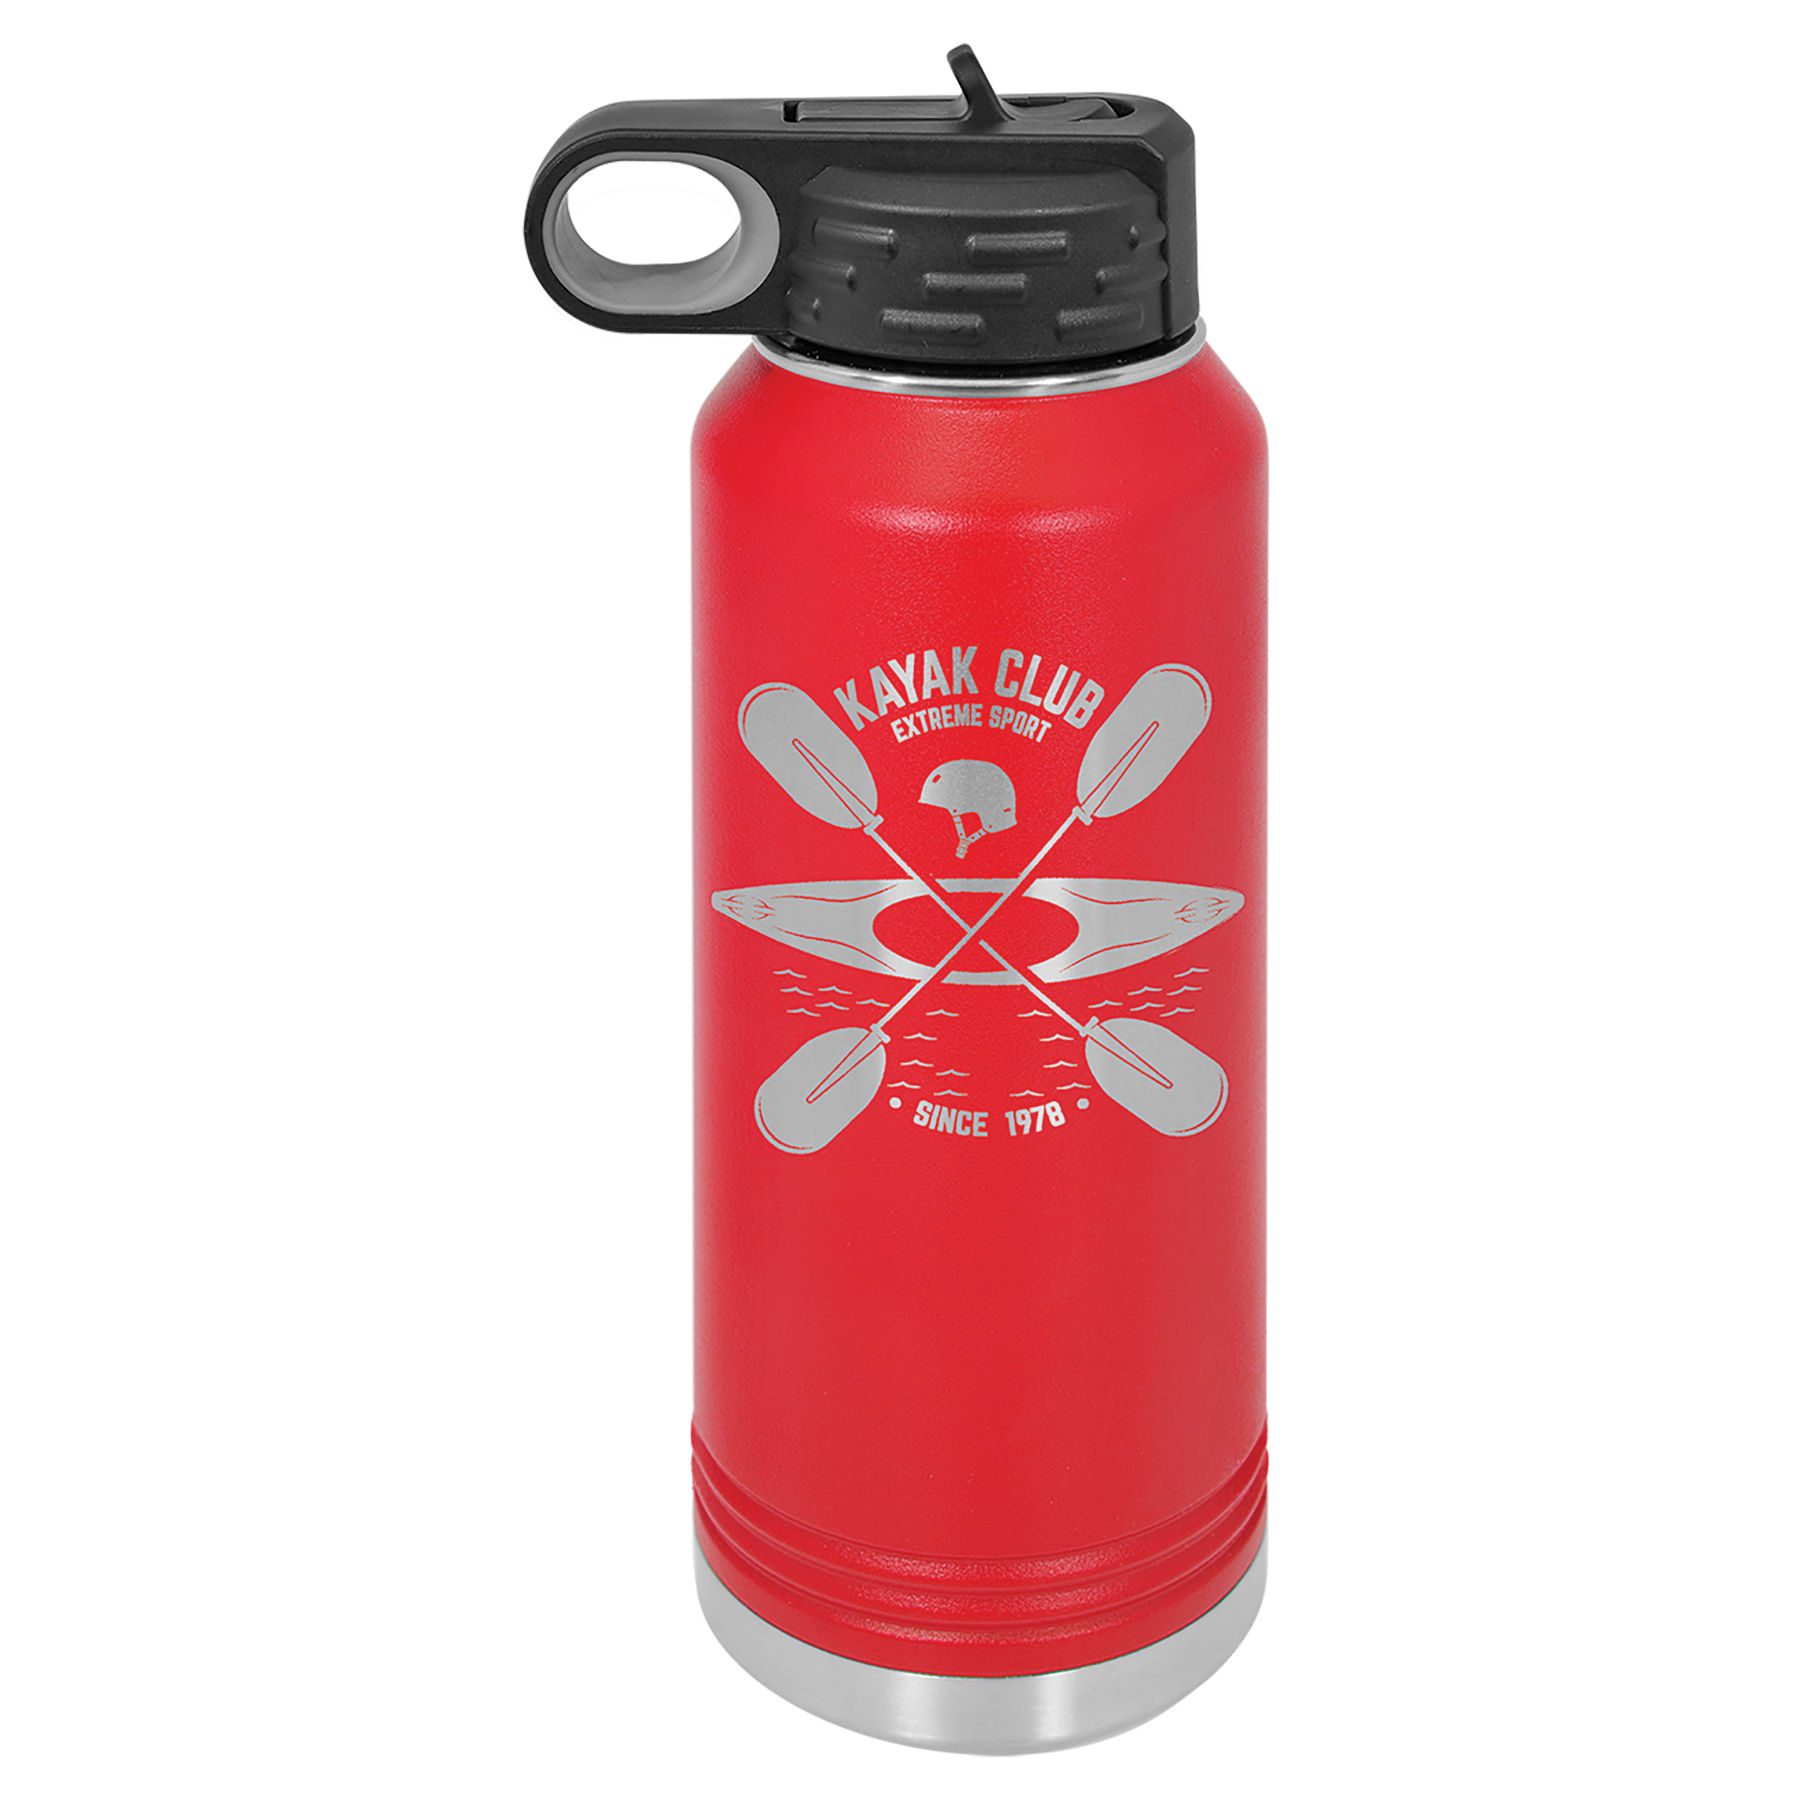 32 oz. Red Stainless Steel Insulated Water Bottler.  Customizable with your personal image or saying.